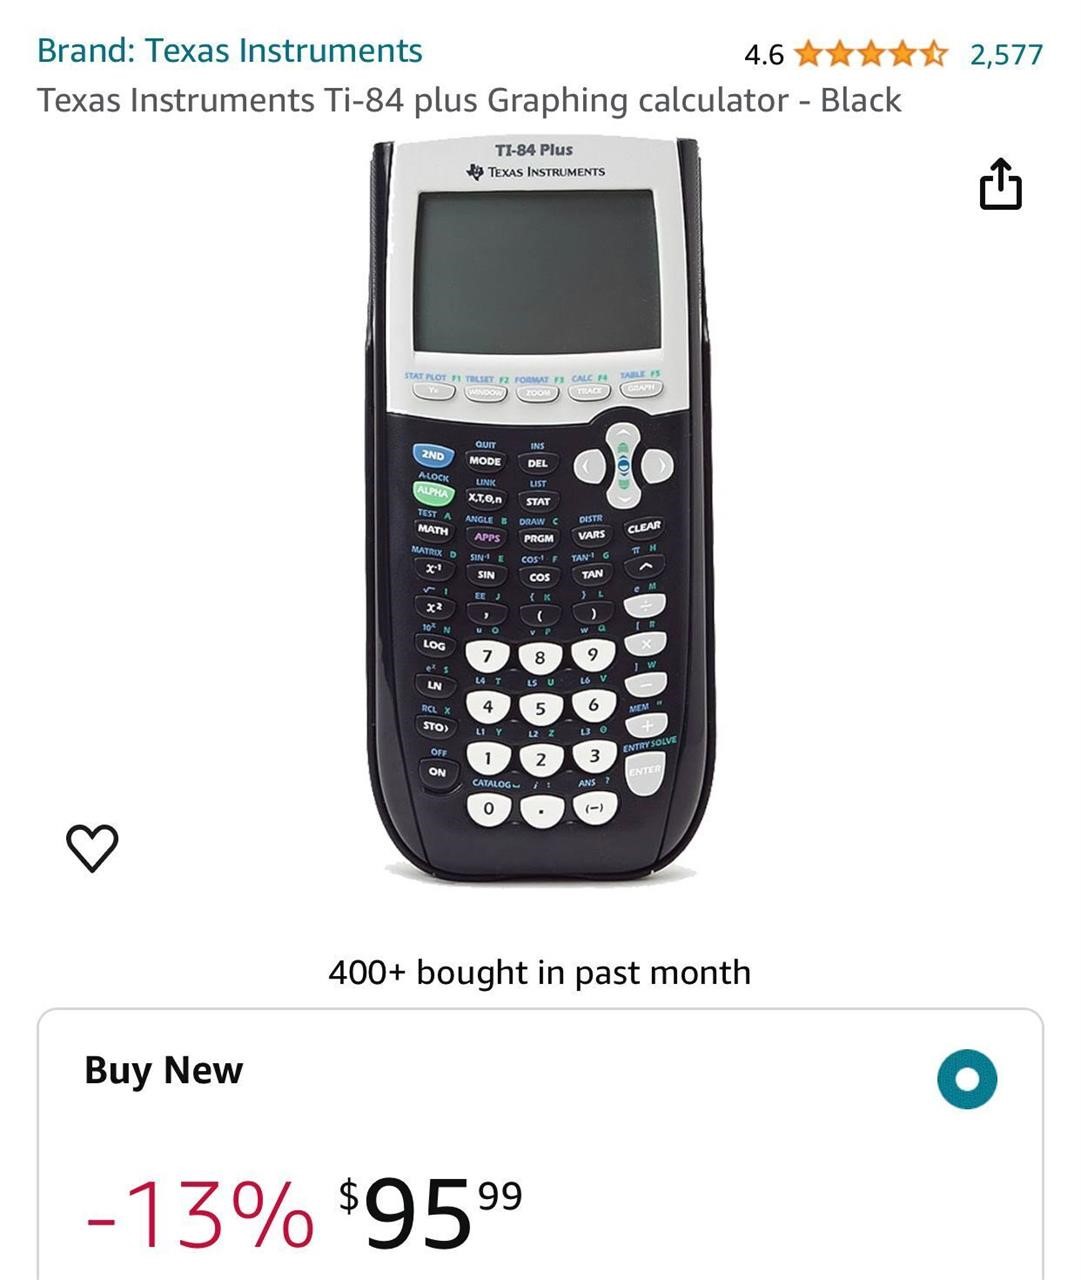 Texas Instruments Ti-84 plus Graphing calculator